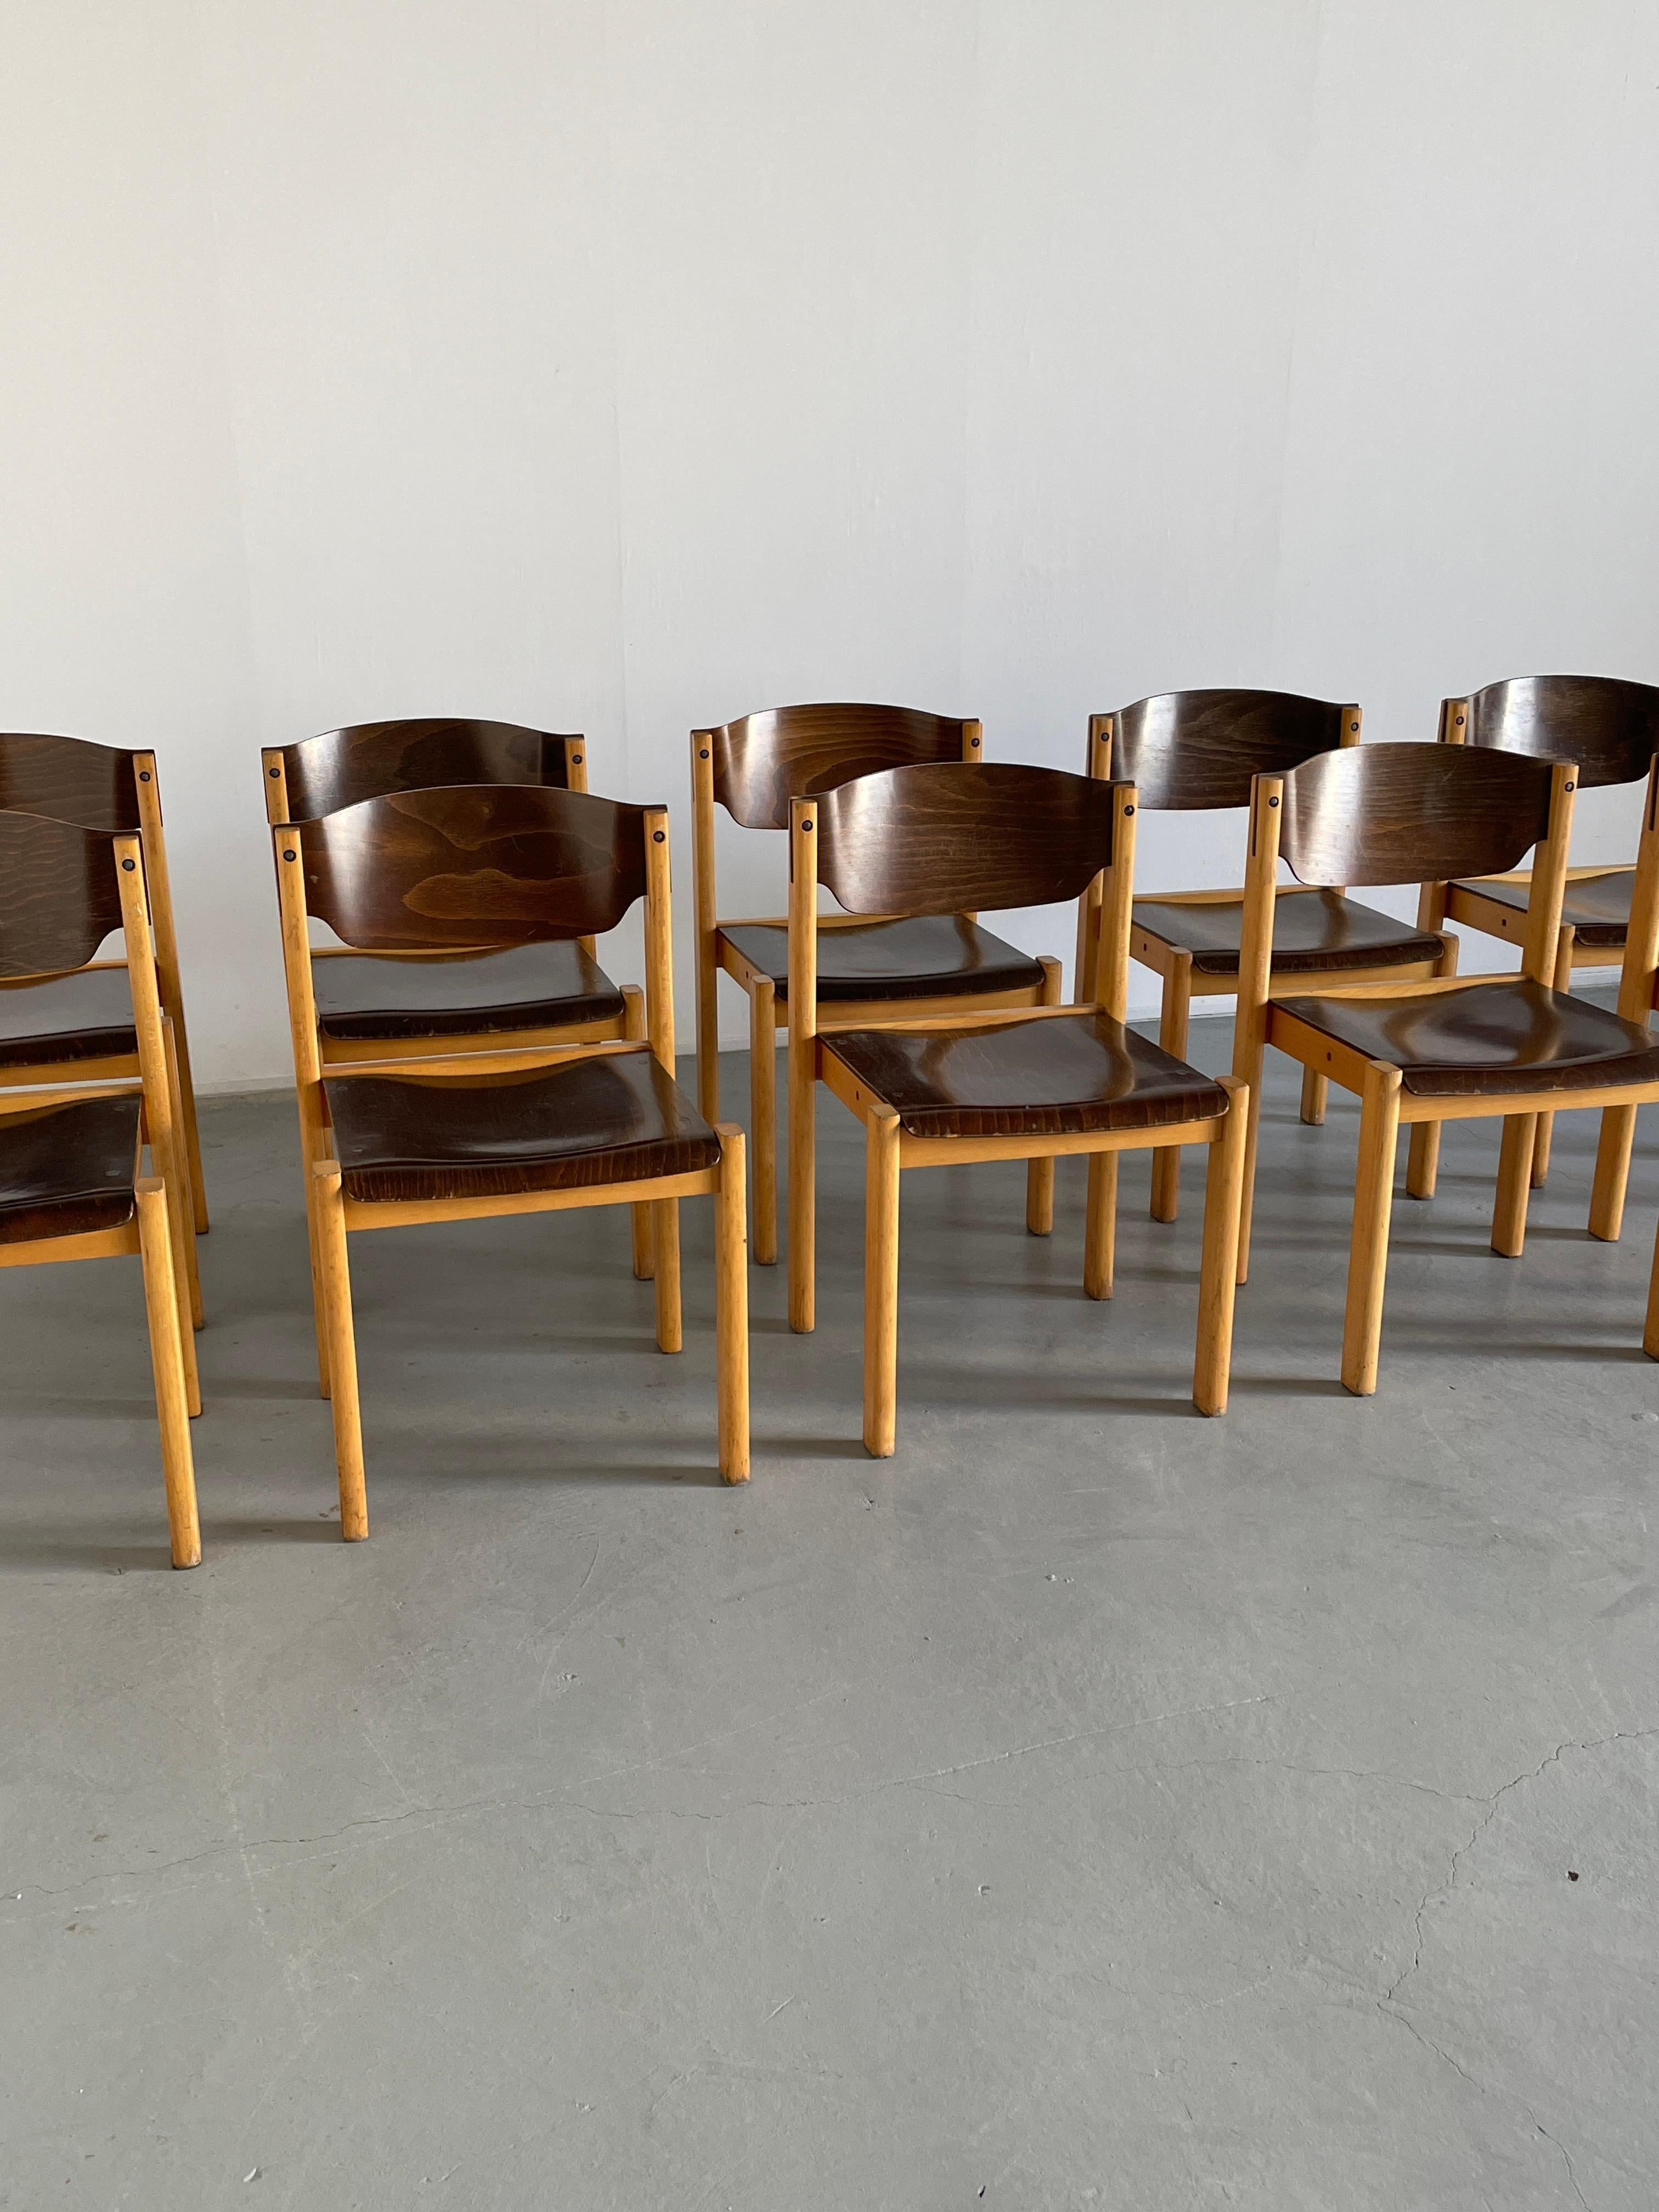 Mid-Century Modern stackable dining chairs or visitor chairs in beechwood and stained plywood, following the style of Rolan Rainer, produced in the early 1970s in West Germany.
High production quality.

40 pieces available.

Original vintage